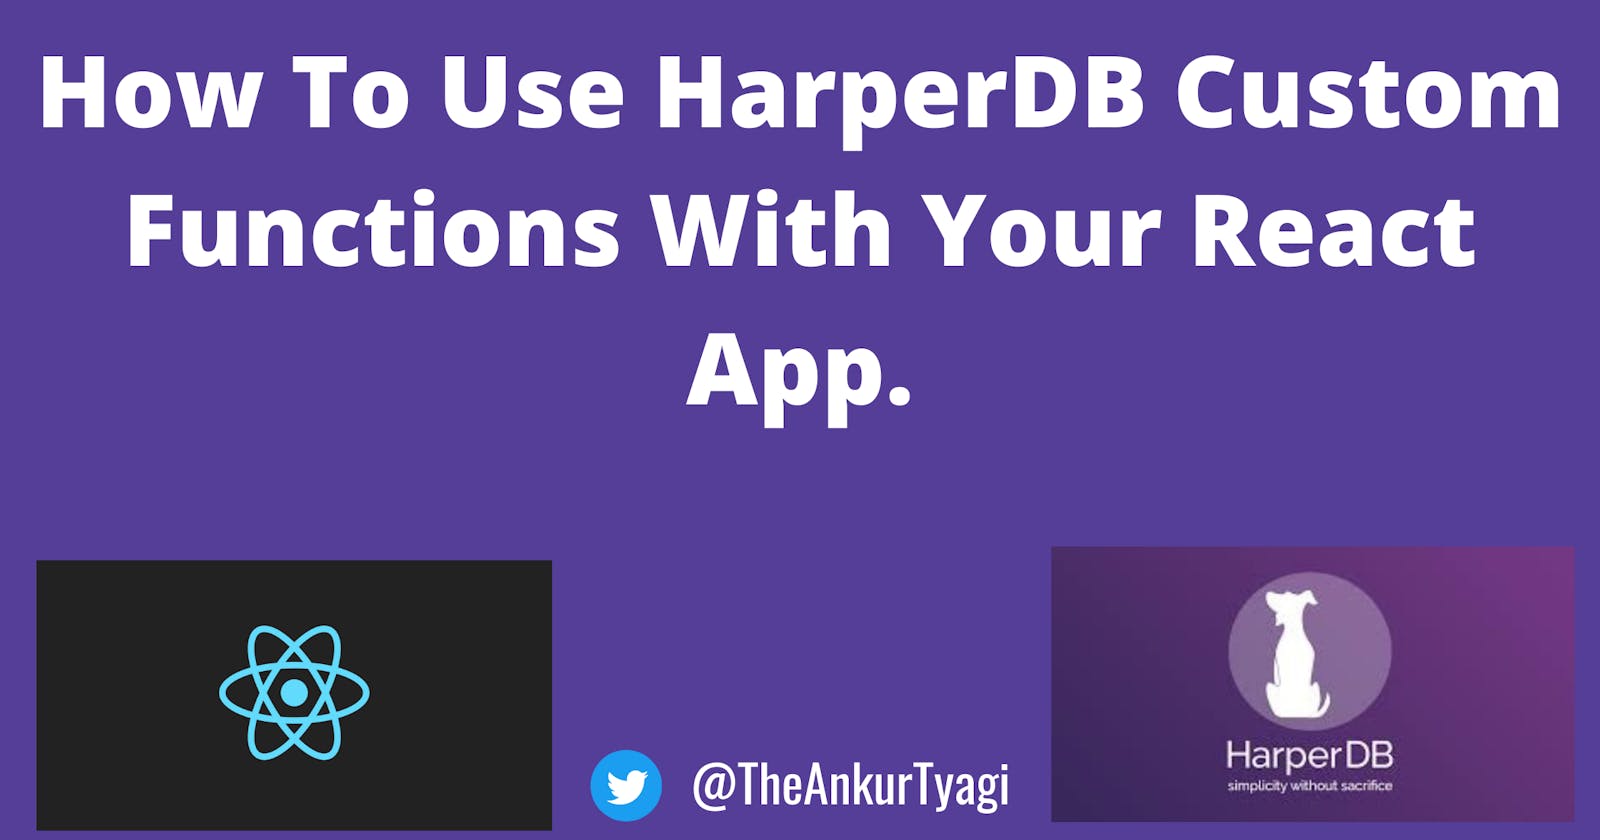 How To Use HarperDB Custom Functions With Your React App.